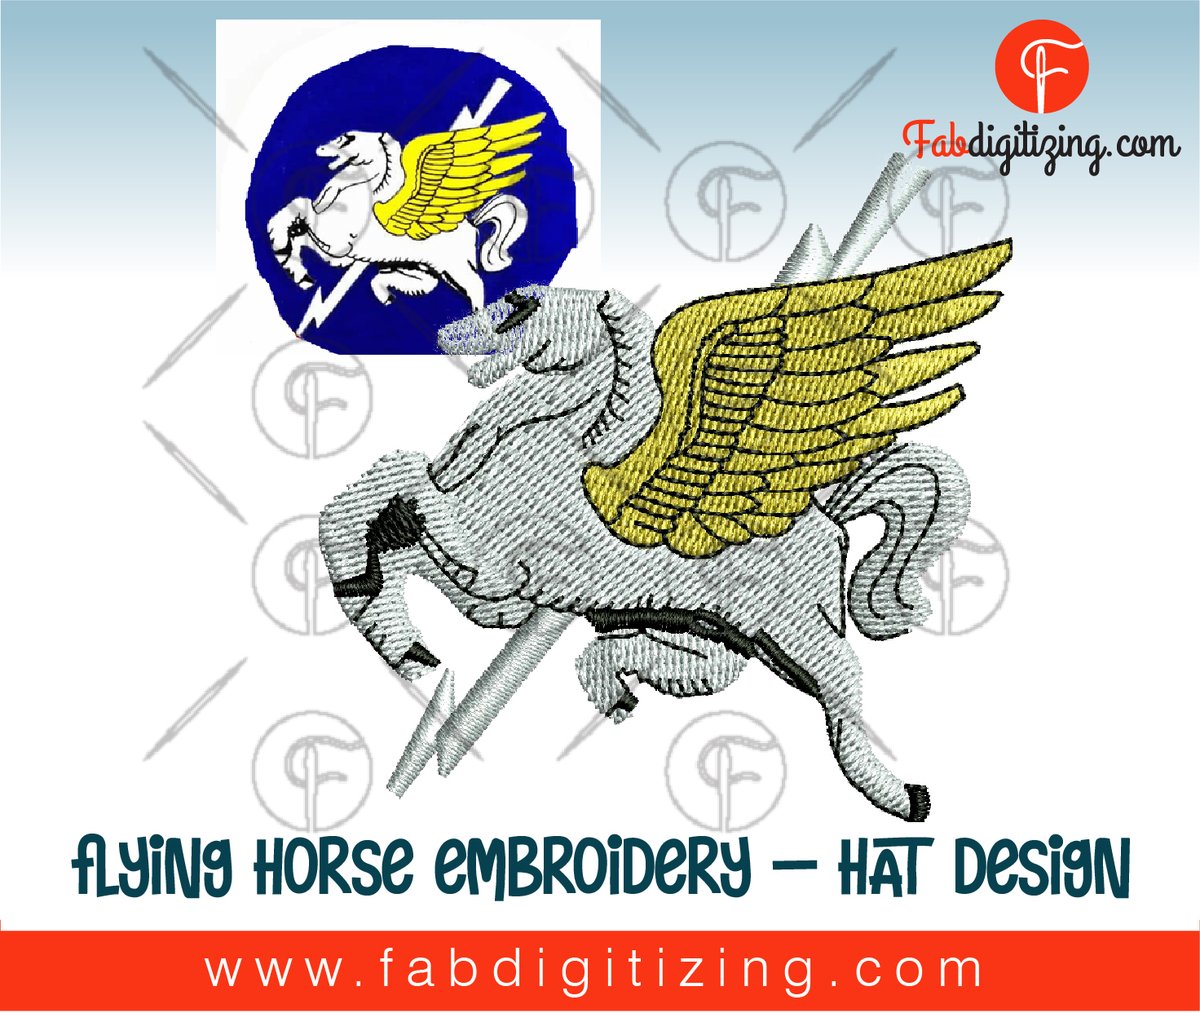 Flying horse embroidery - Hat design.
#CustomEmbroidery #EmbroideryArt #StitchingLove #PersonalizedEmbroidery #ThreadMagic #EmbroideryDesigns #NeedleAndThread #HandmadeEmbroidery #CustomStitching #EmbroideryHoops #CraftyHands #EmbroideryAddict #UniqueStitches #ThreadCraft